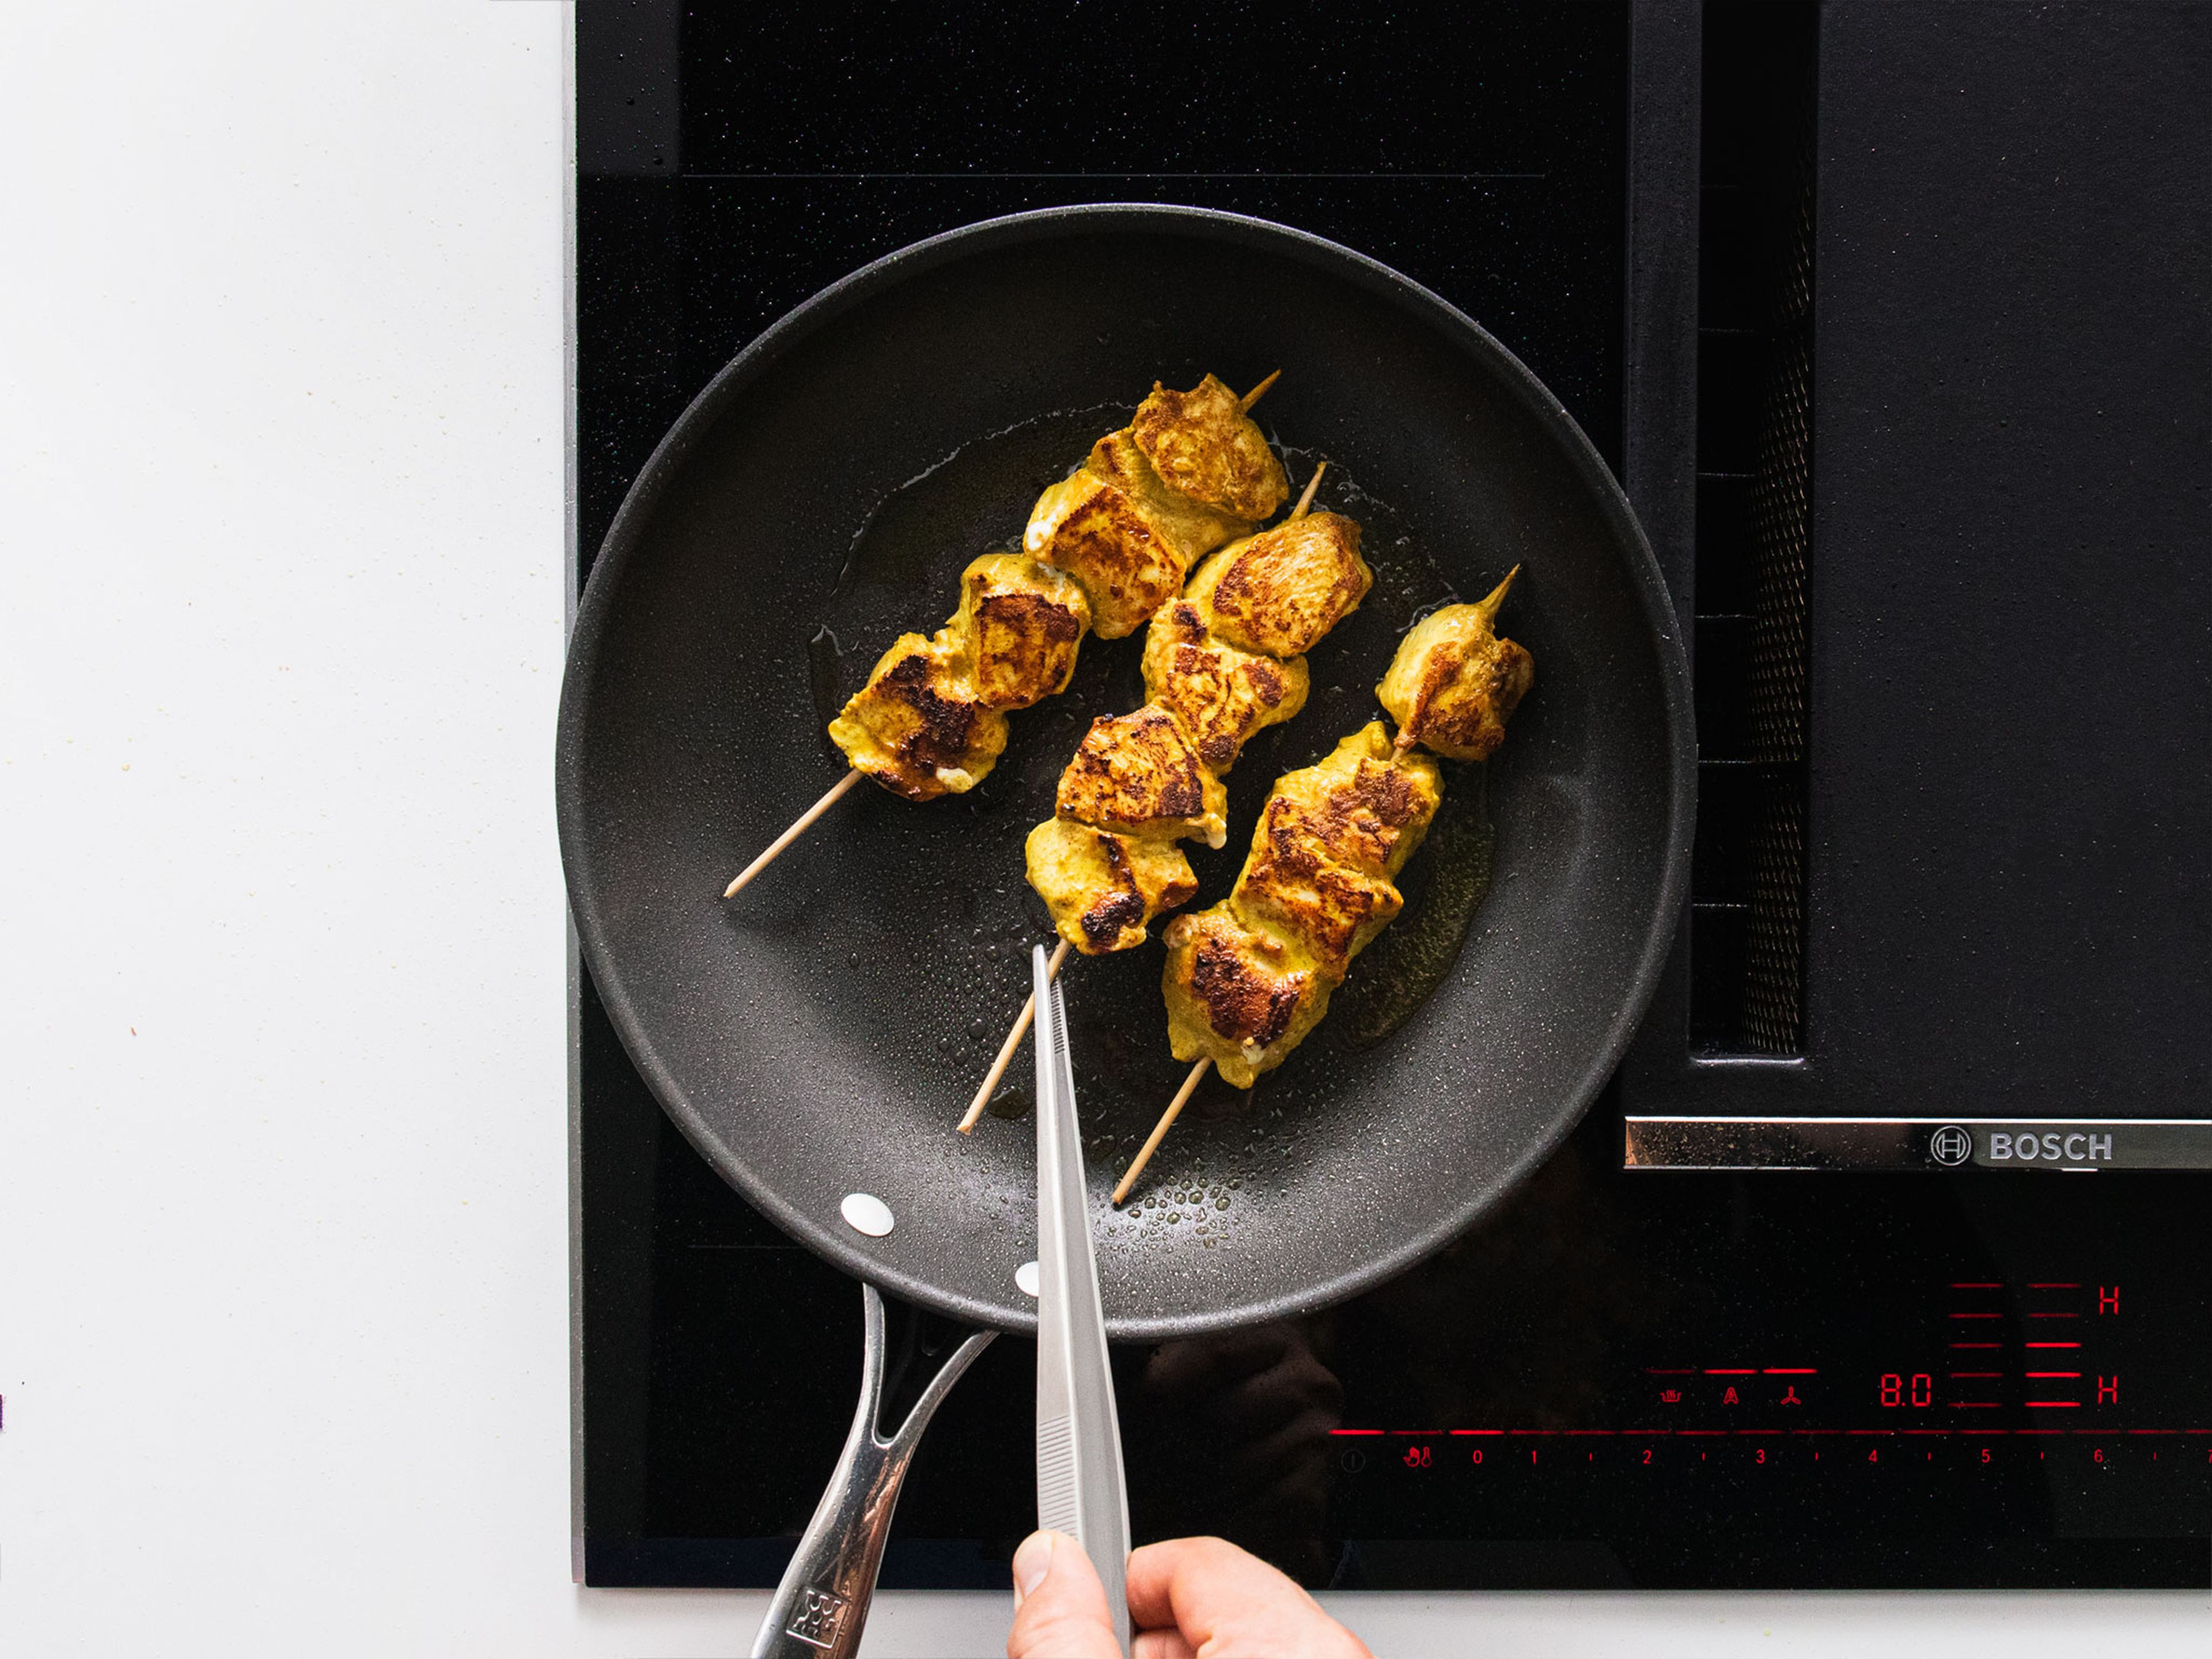 Heat some vegetable oil in the same pan and fry chicken skewers on all sides until well-browned and cooked through. Serve with pita bread, salad and dressing, fresh cilantro and mint, and yogurt dip. Enjoy!